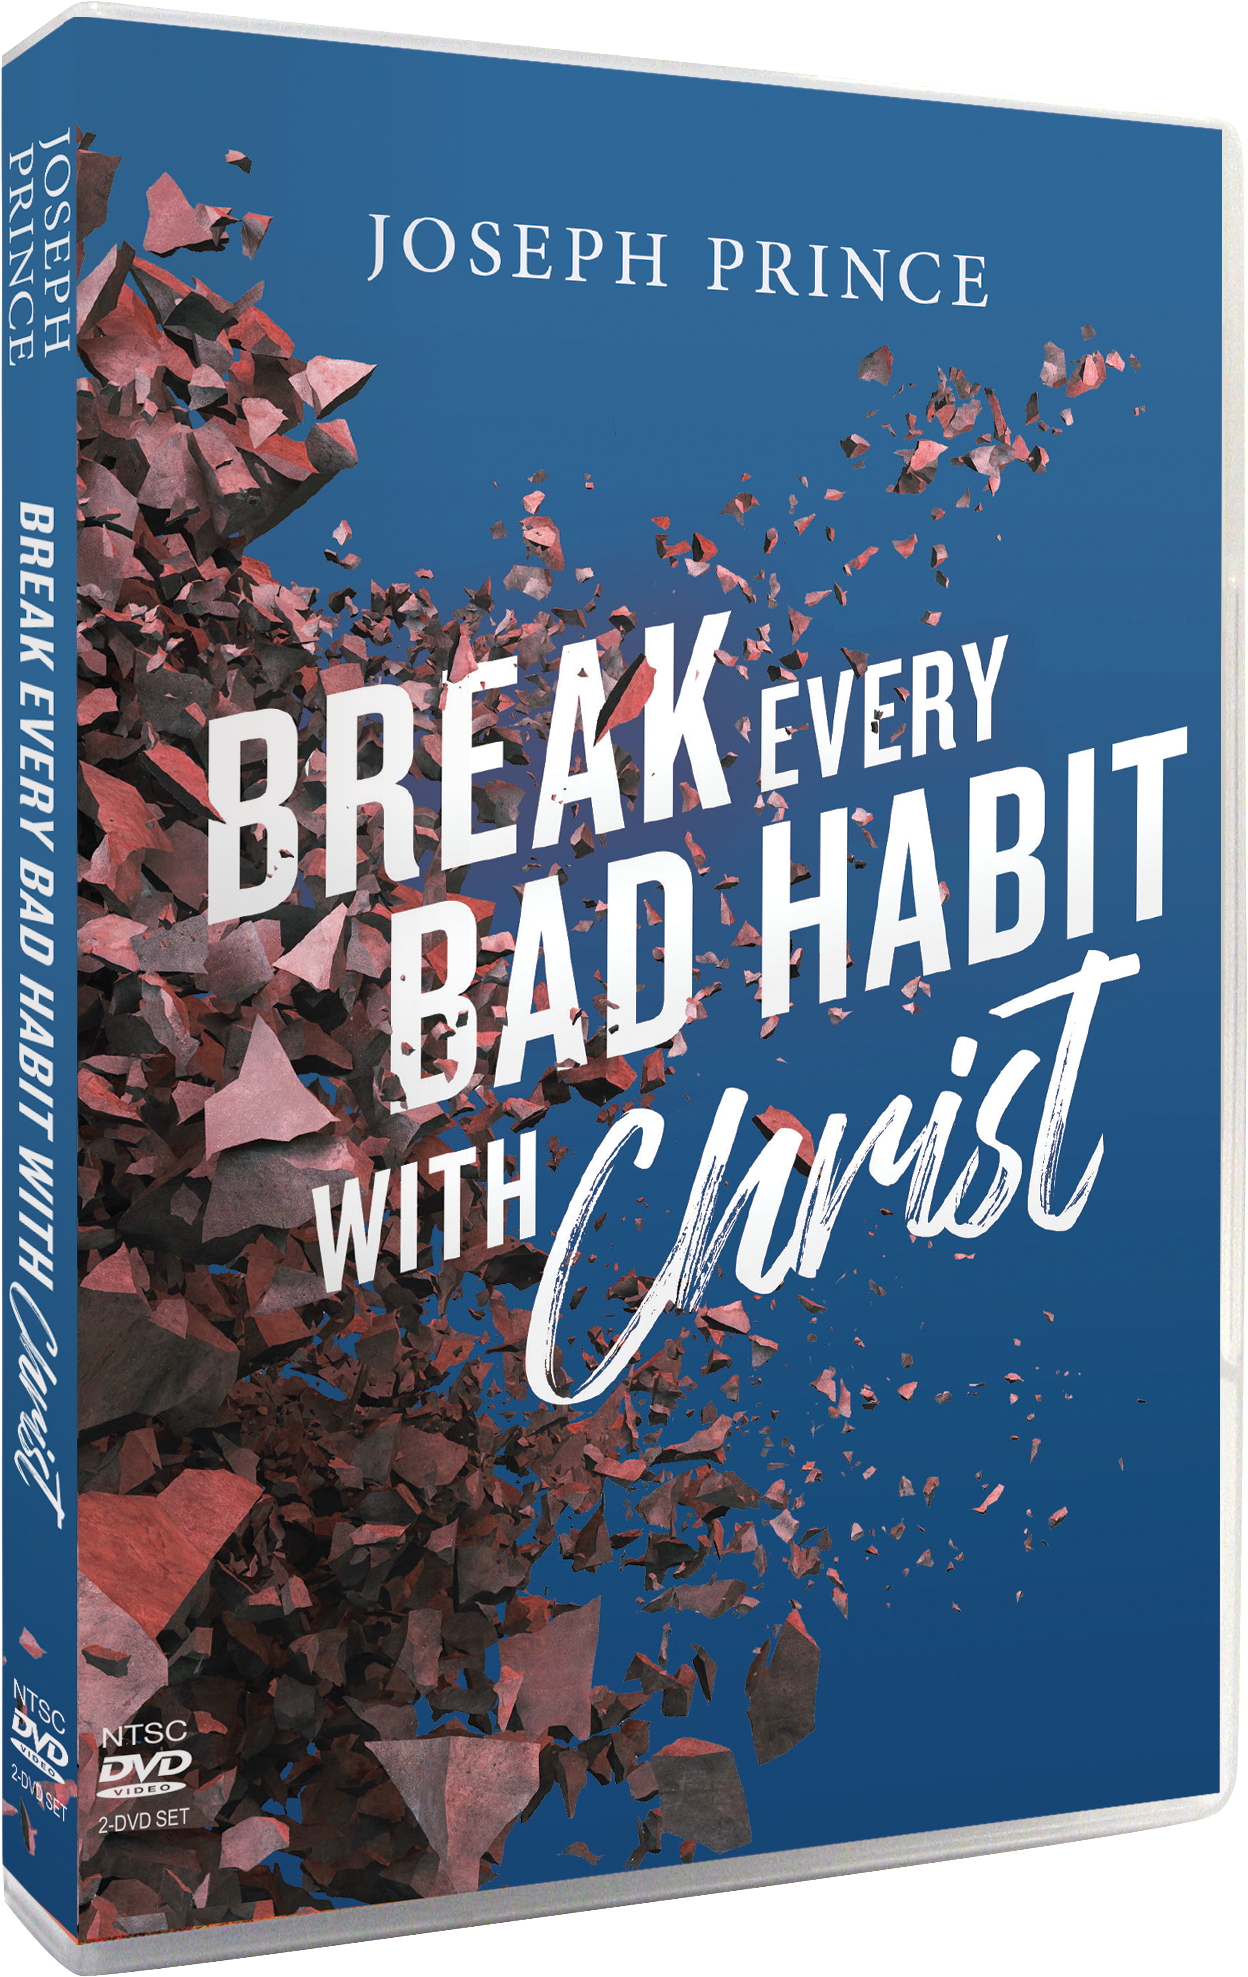 ROCKONLINE | New Creation Church | NCC | Joseph Prince | Break Every Bad Habit With Christ DVD | ROCK Bookshop | ROCK Bookstore | Star Vista | Sermon Teachings | Video |  Free delivery for Singapore Orders above $50.